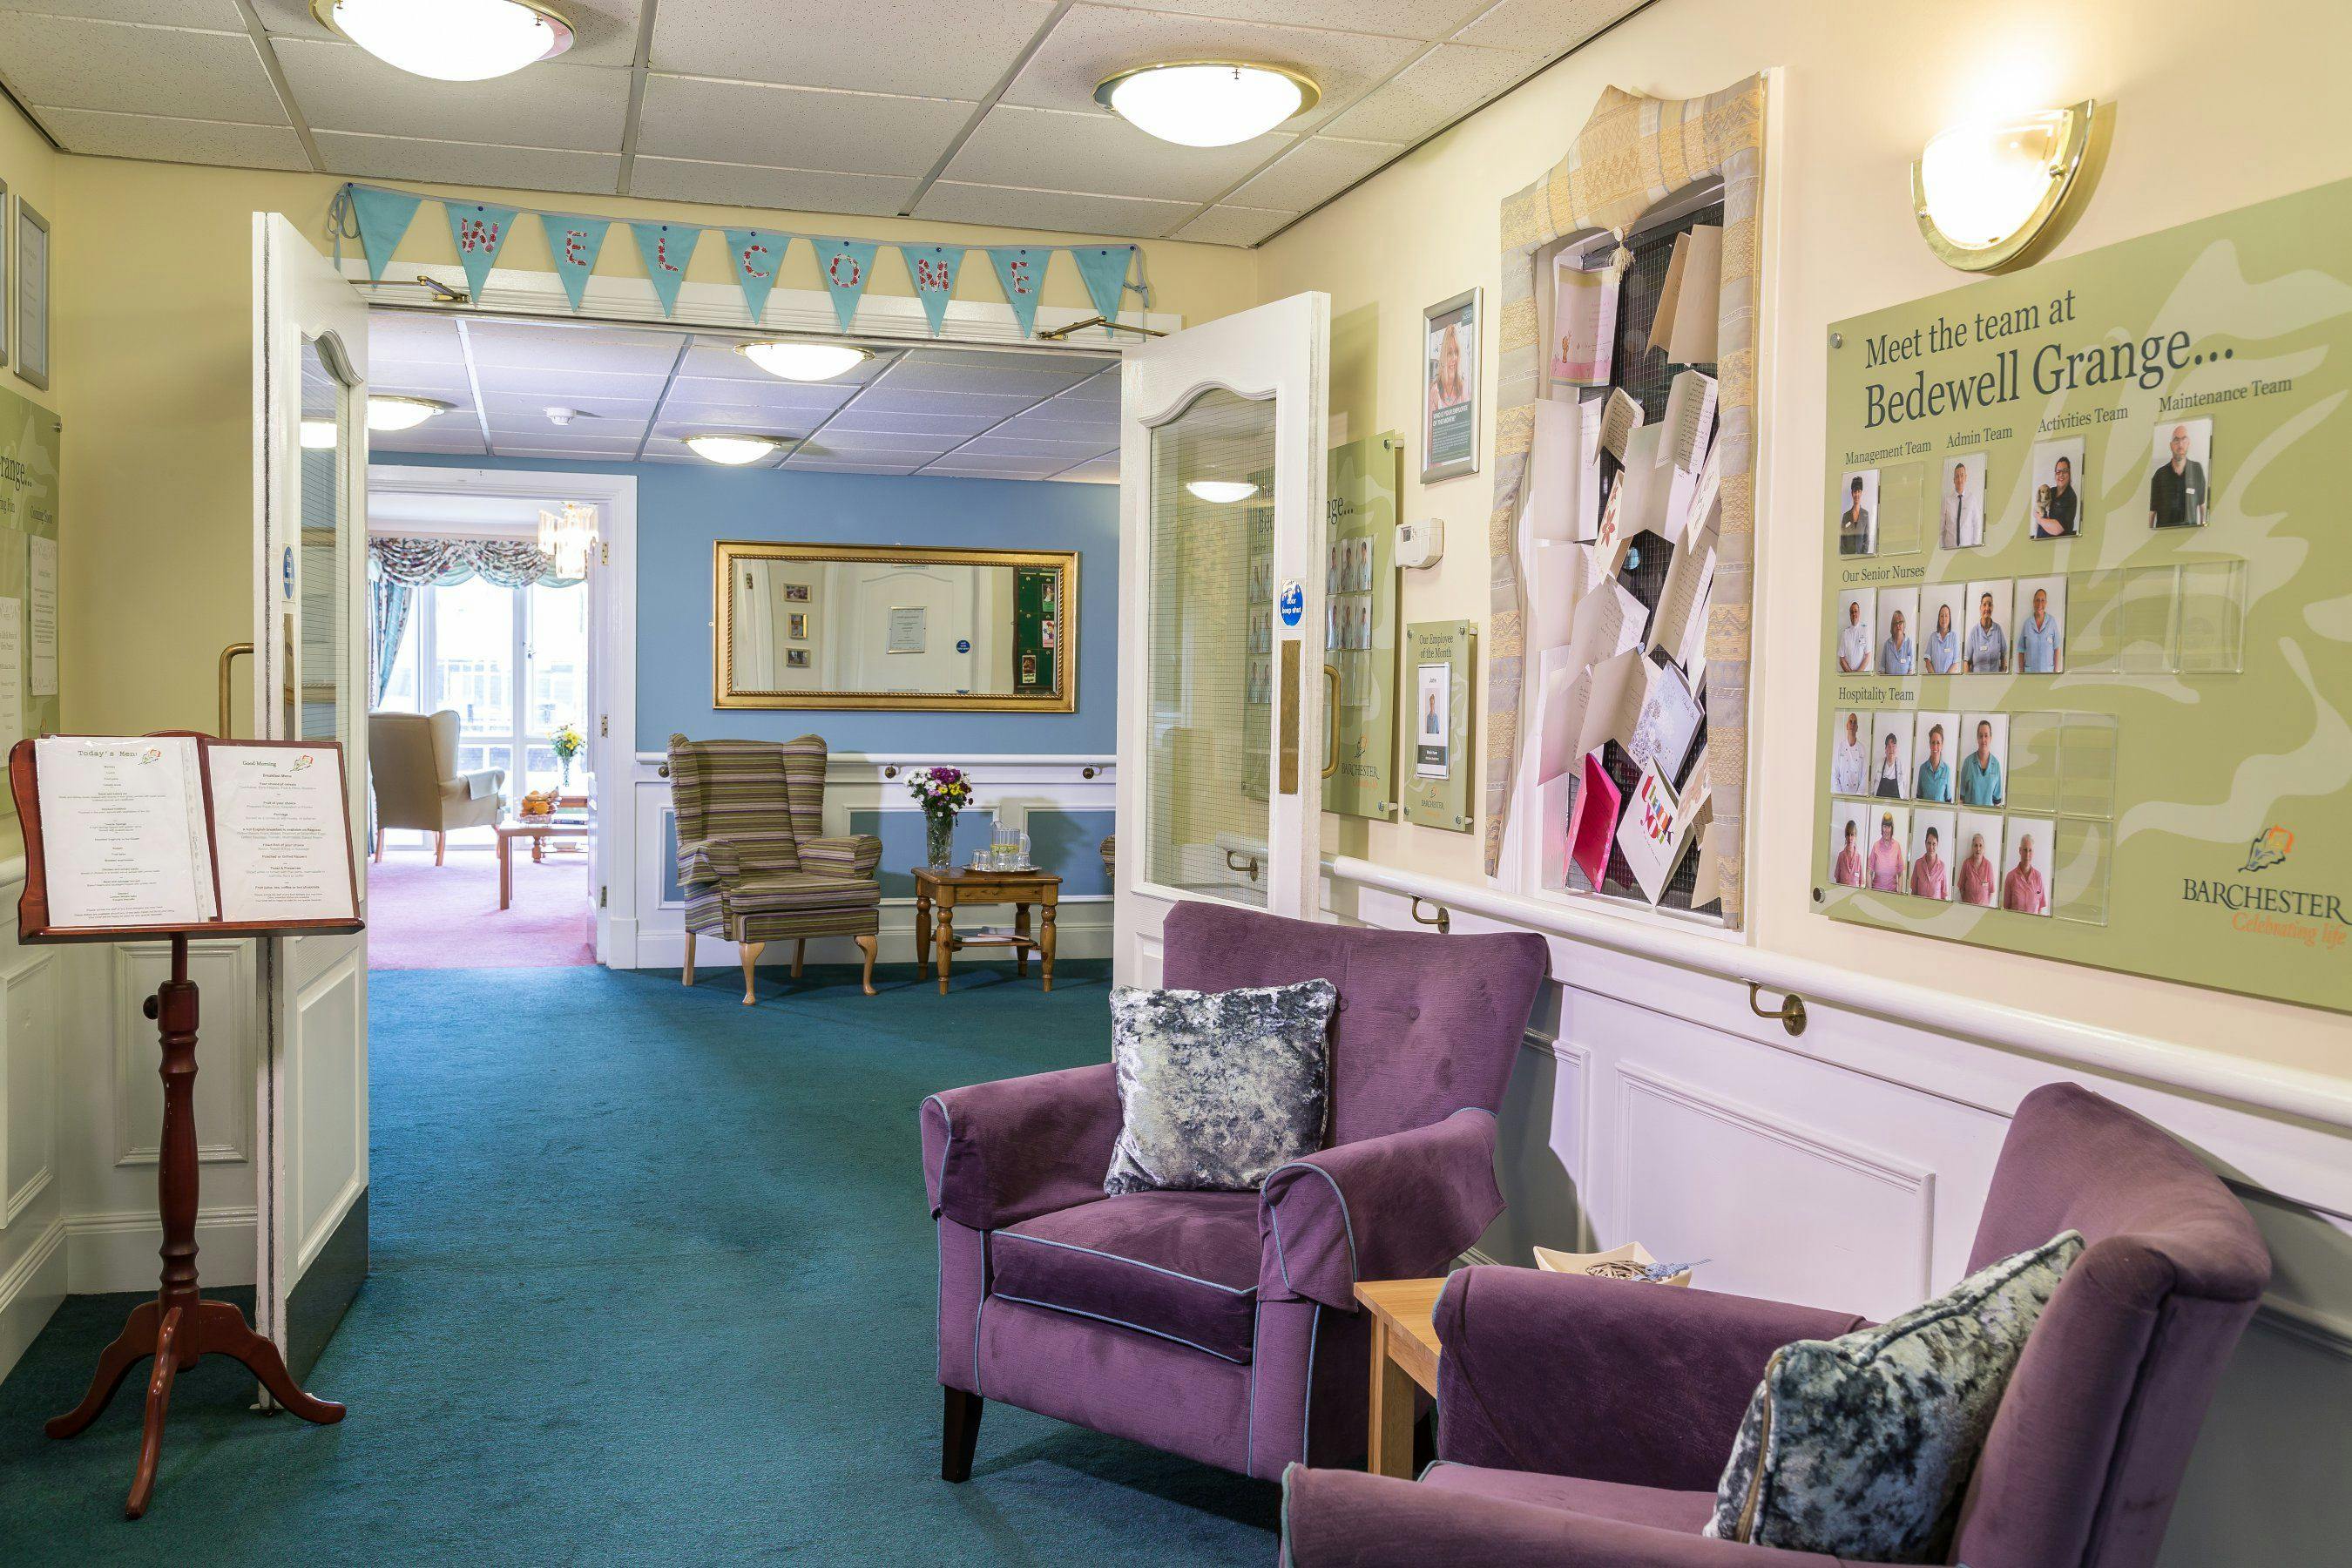 Barchester Healthcare - Bedewell Grange care home 4